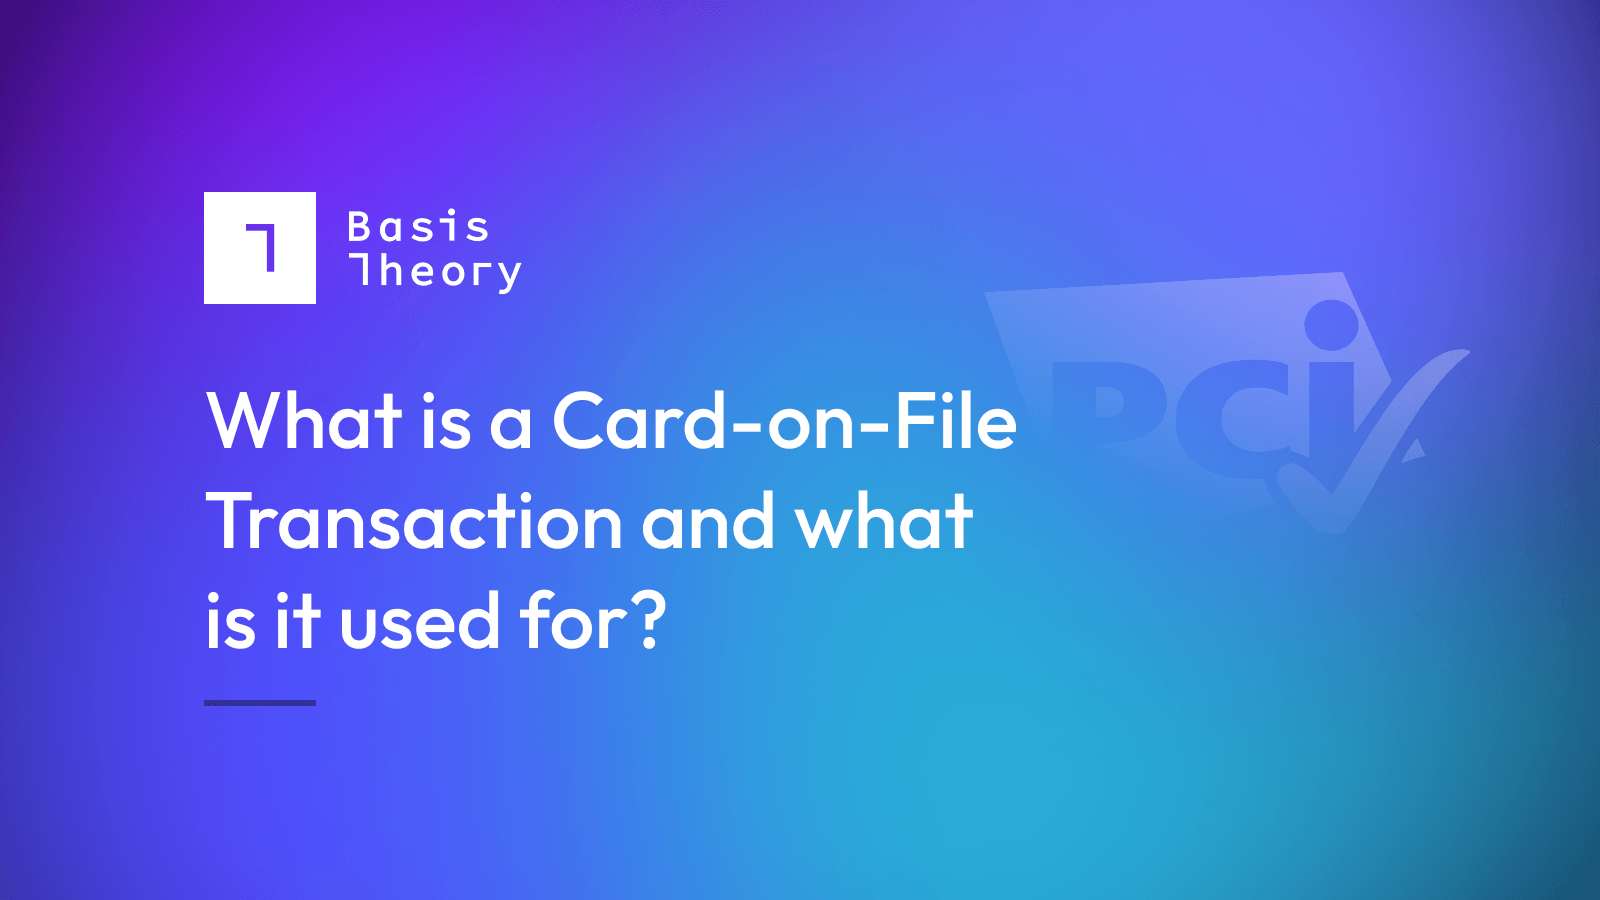 what is a card-on-file transaction?